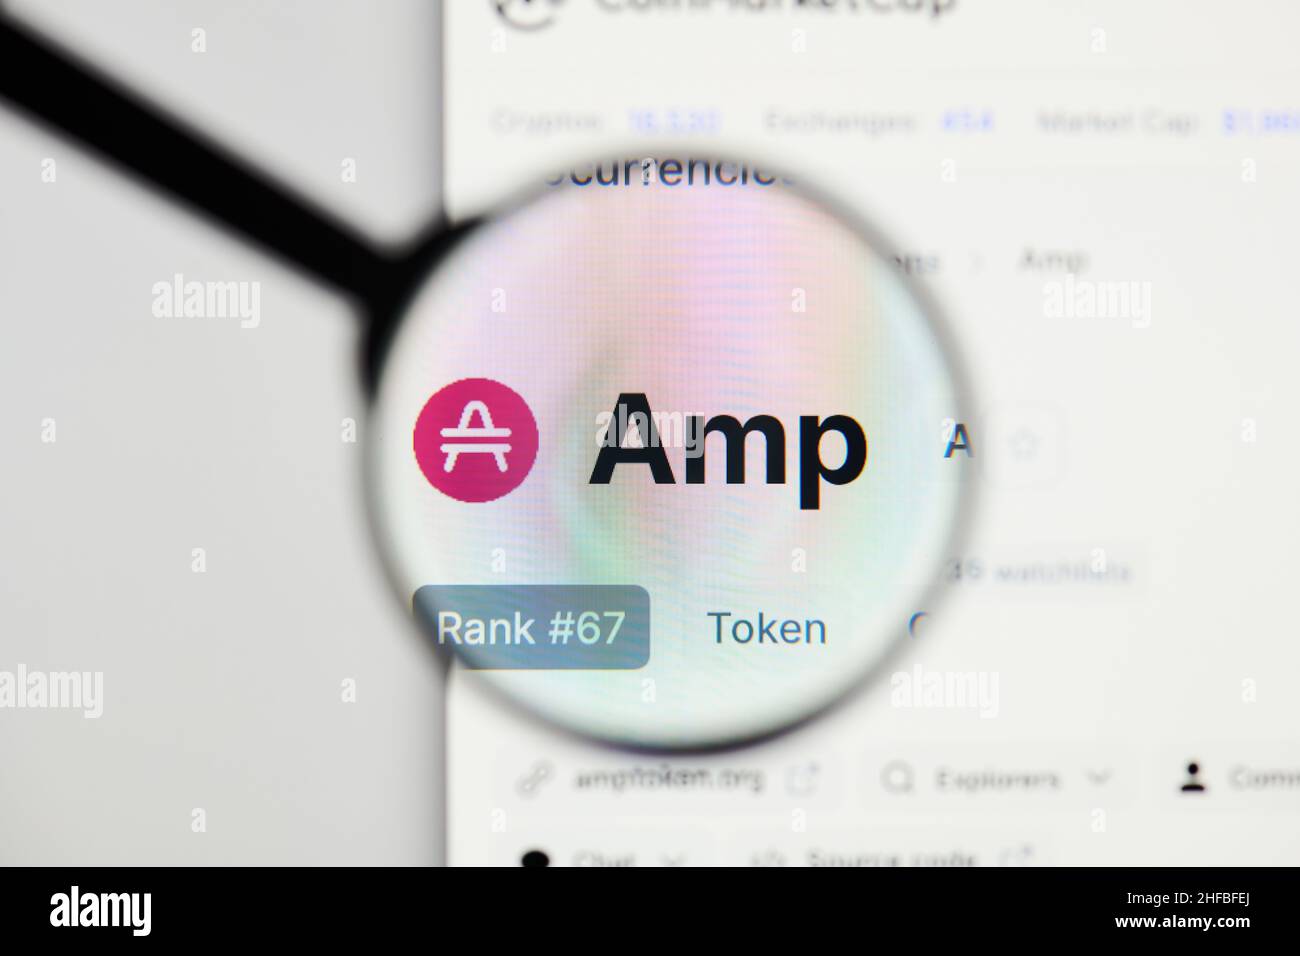 Milan, Italy - January 11, 2022: amp - AMP website's hp.  amp, AMP coin logo visible through a loope. Defi, ntf, cryptocurrency concepts illustrative Stock Photo